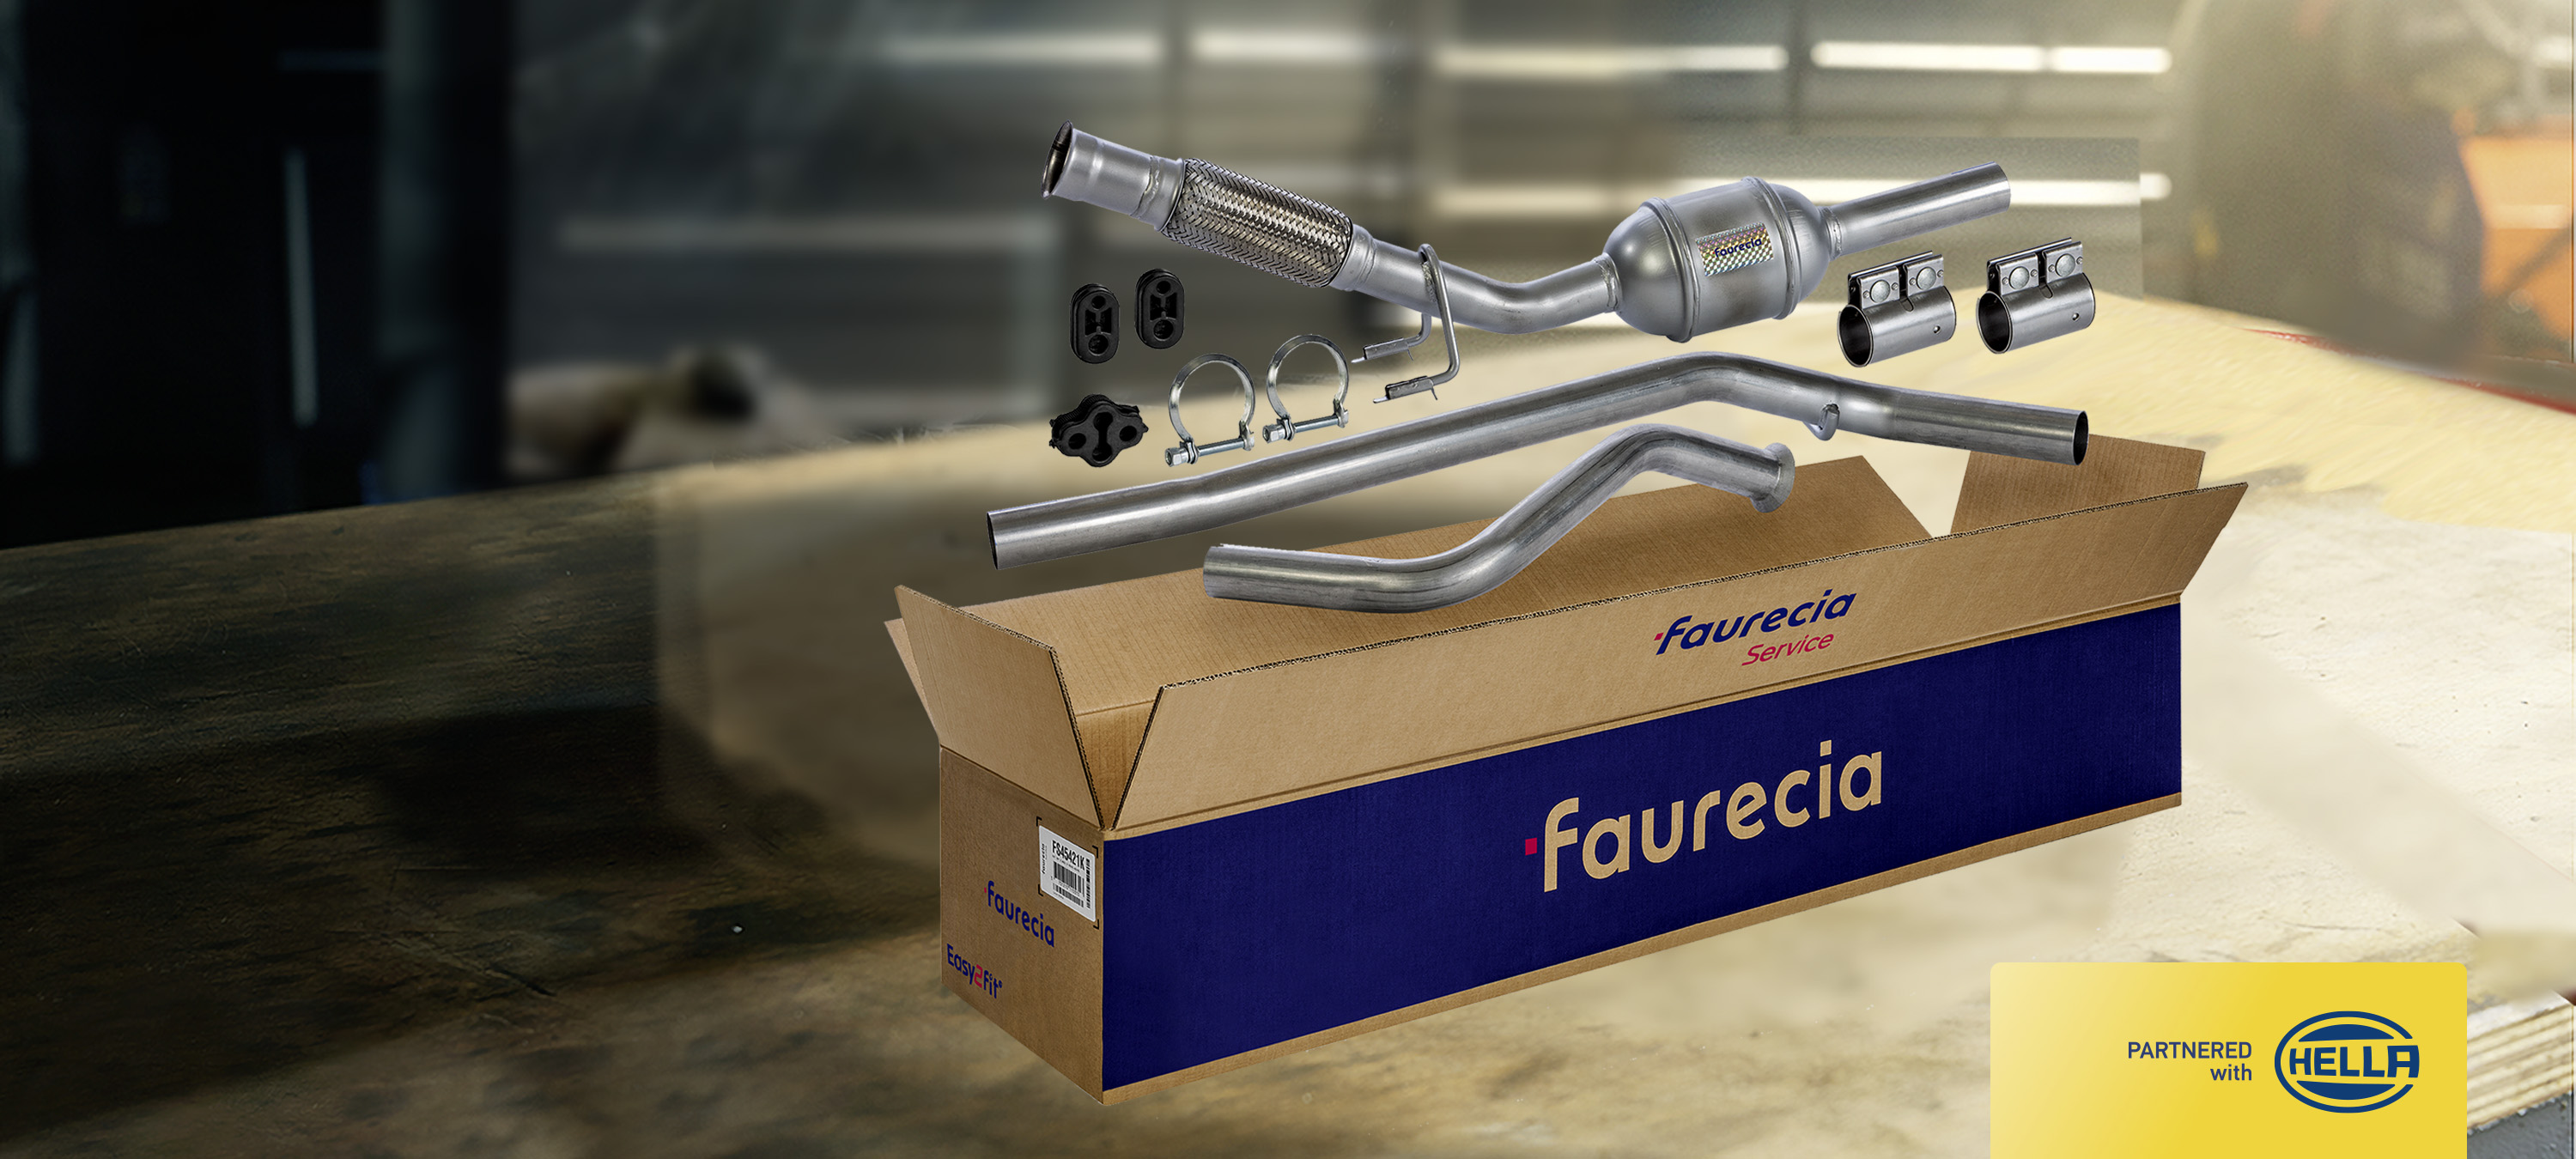 HELLA Aftermarket: Wholesalers and workshops benefit from pooling of expertise with Faurecia Service in the field of exhaust systems